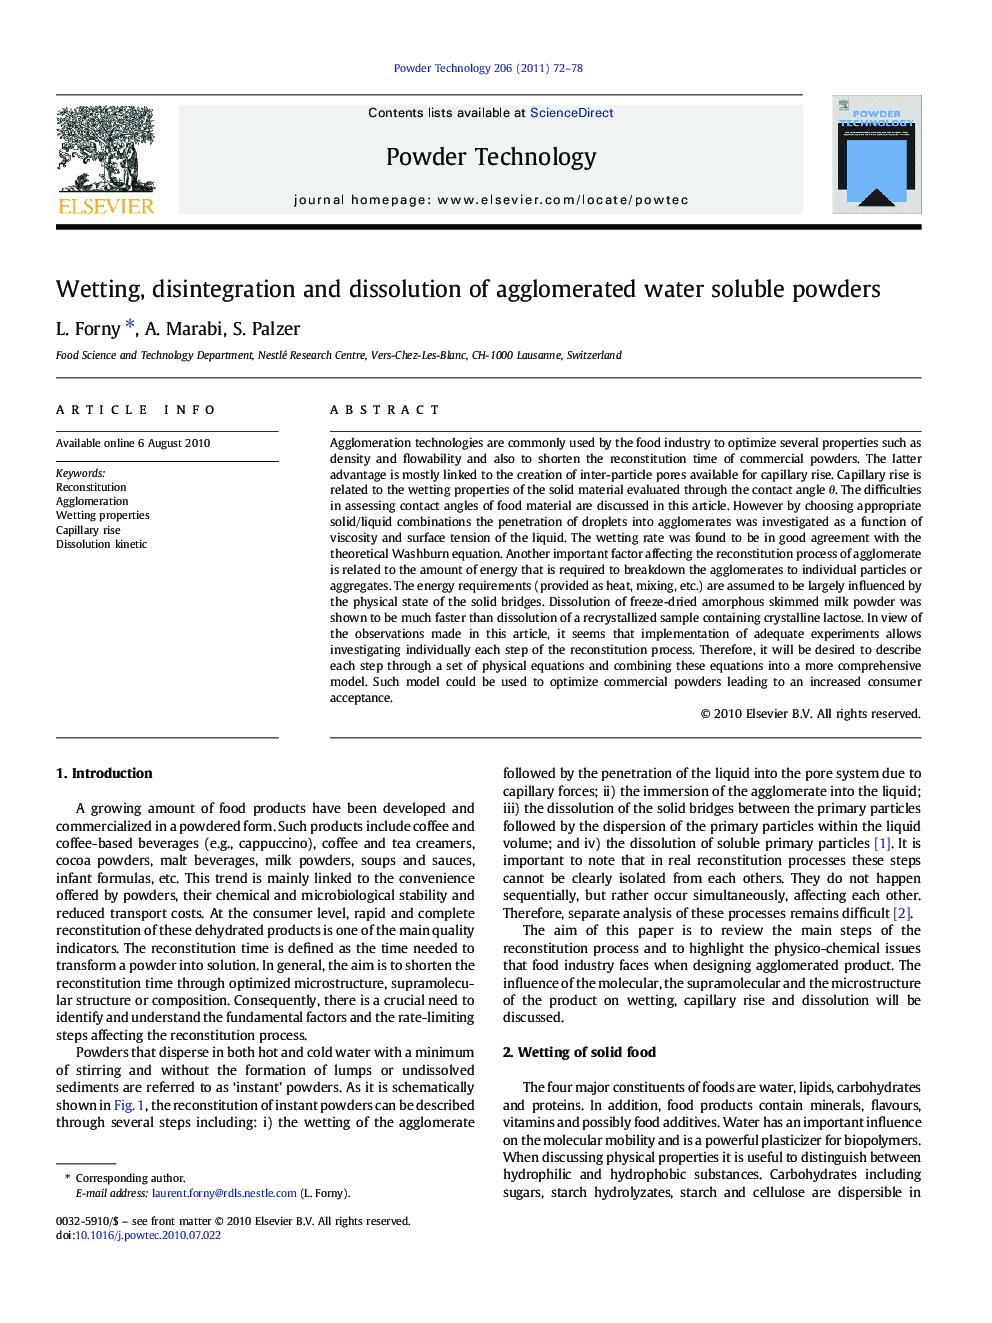 Wetting, disintegration and dissolution of agglomerated water soluble powders